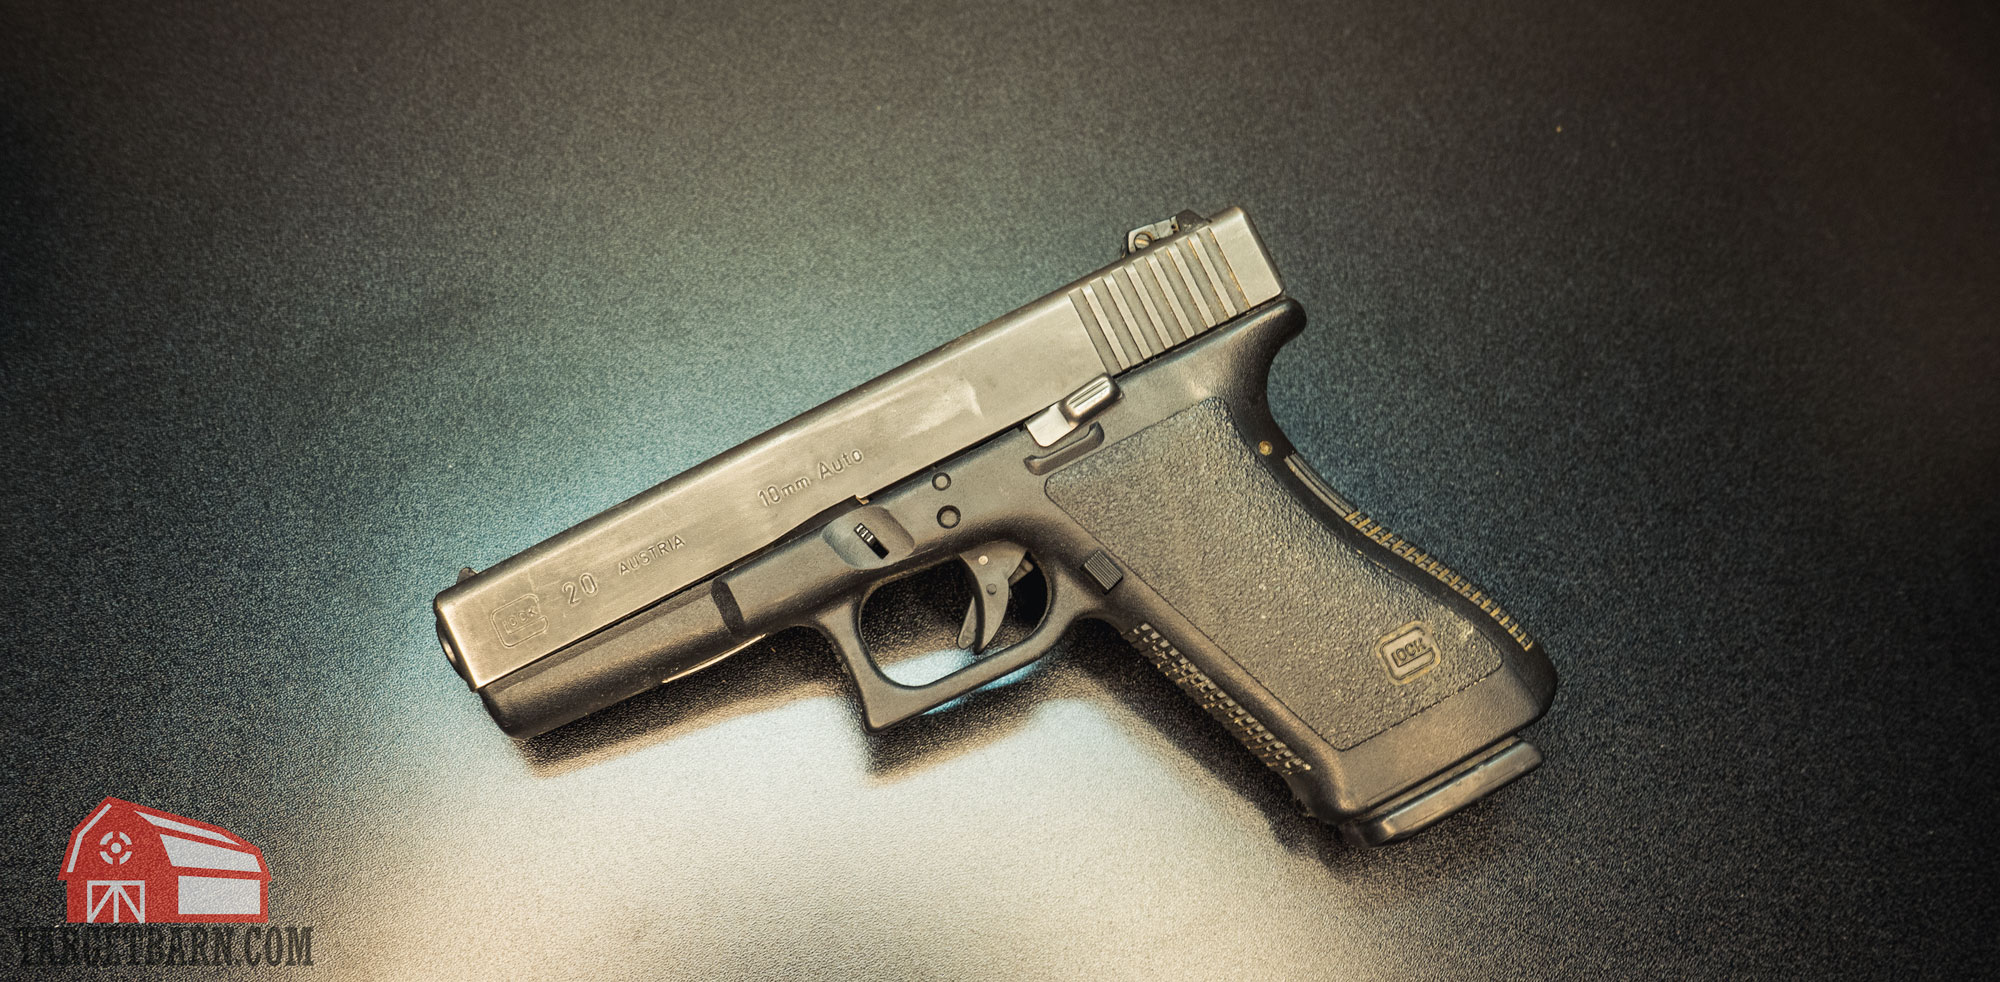 the glock 20 10mm pistol with a 4.61" barrel length